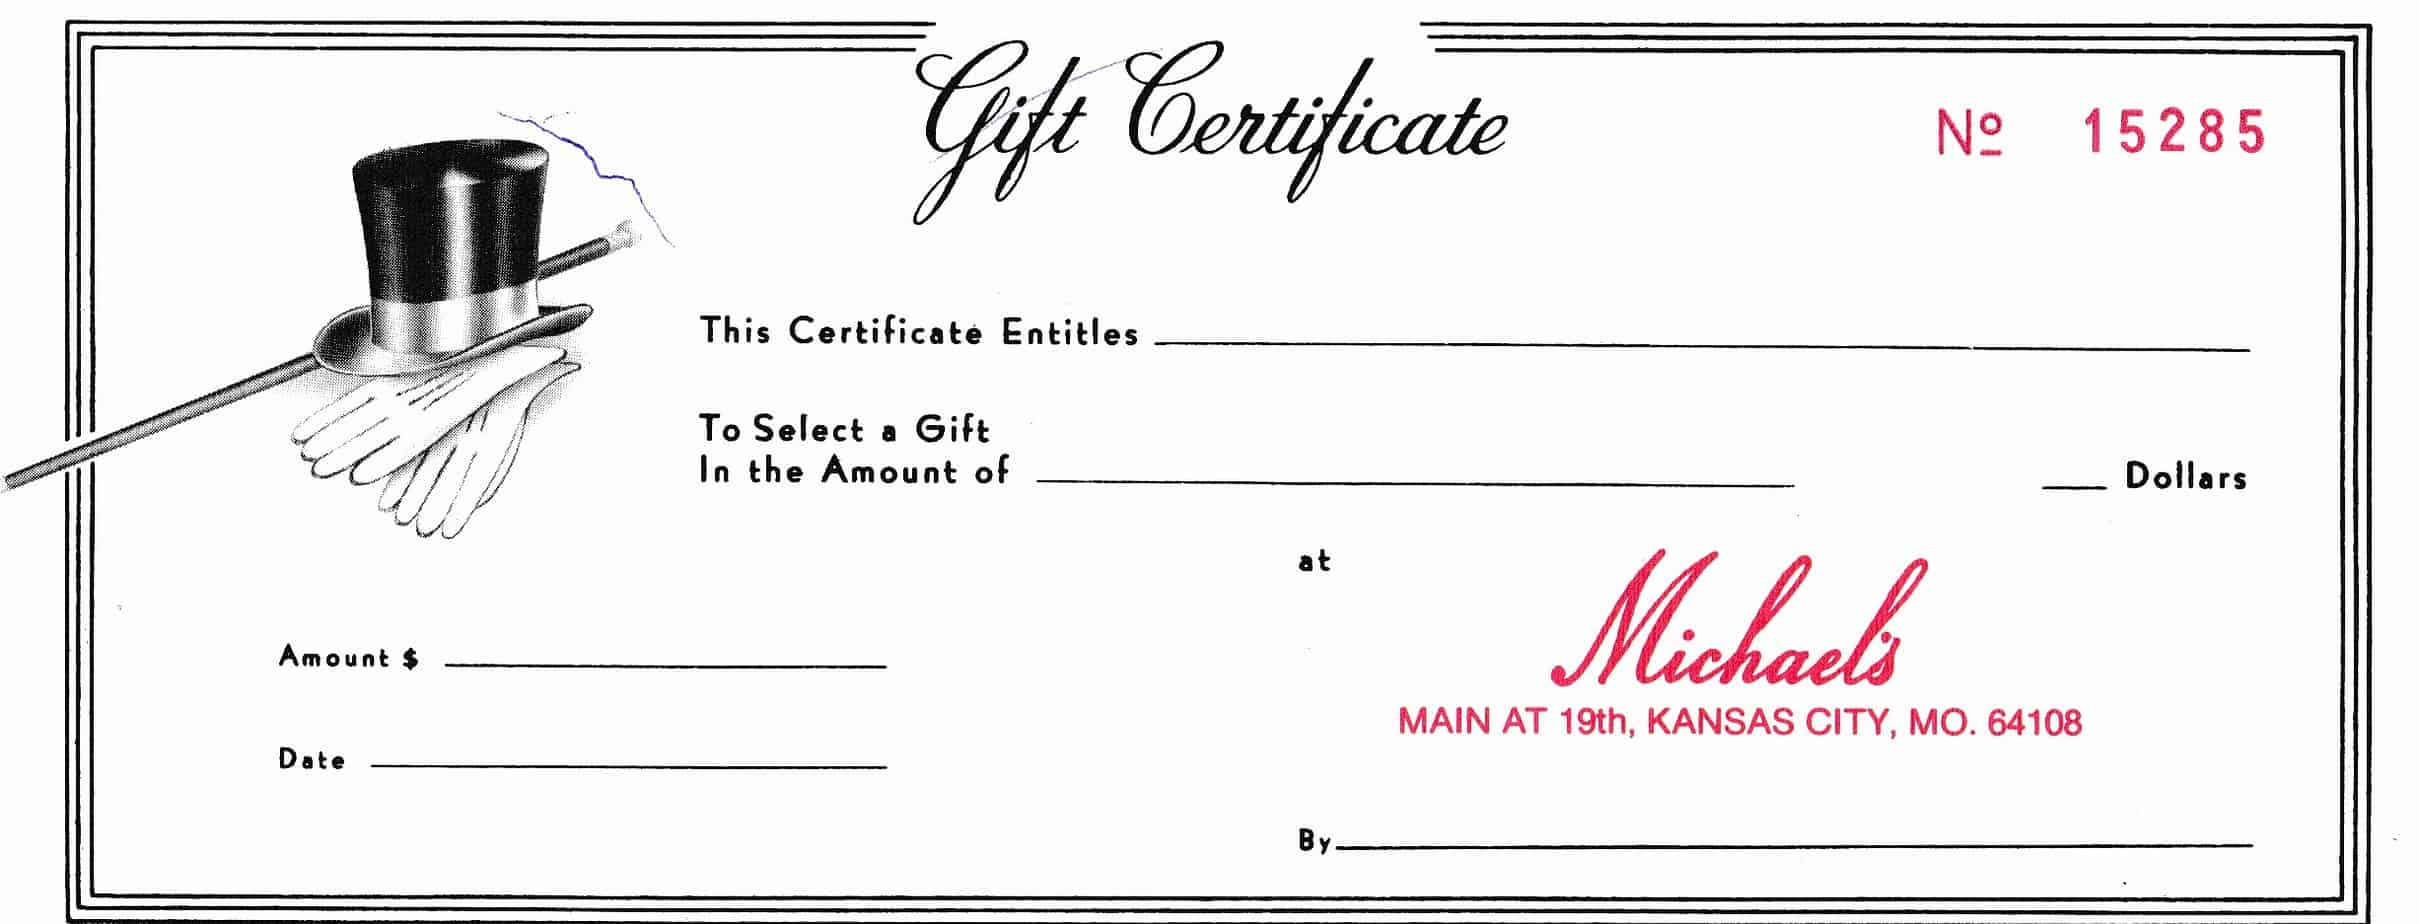 gift certififate template 2252